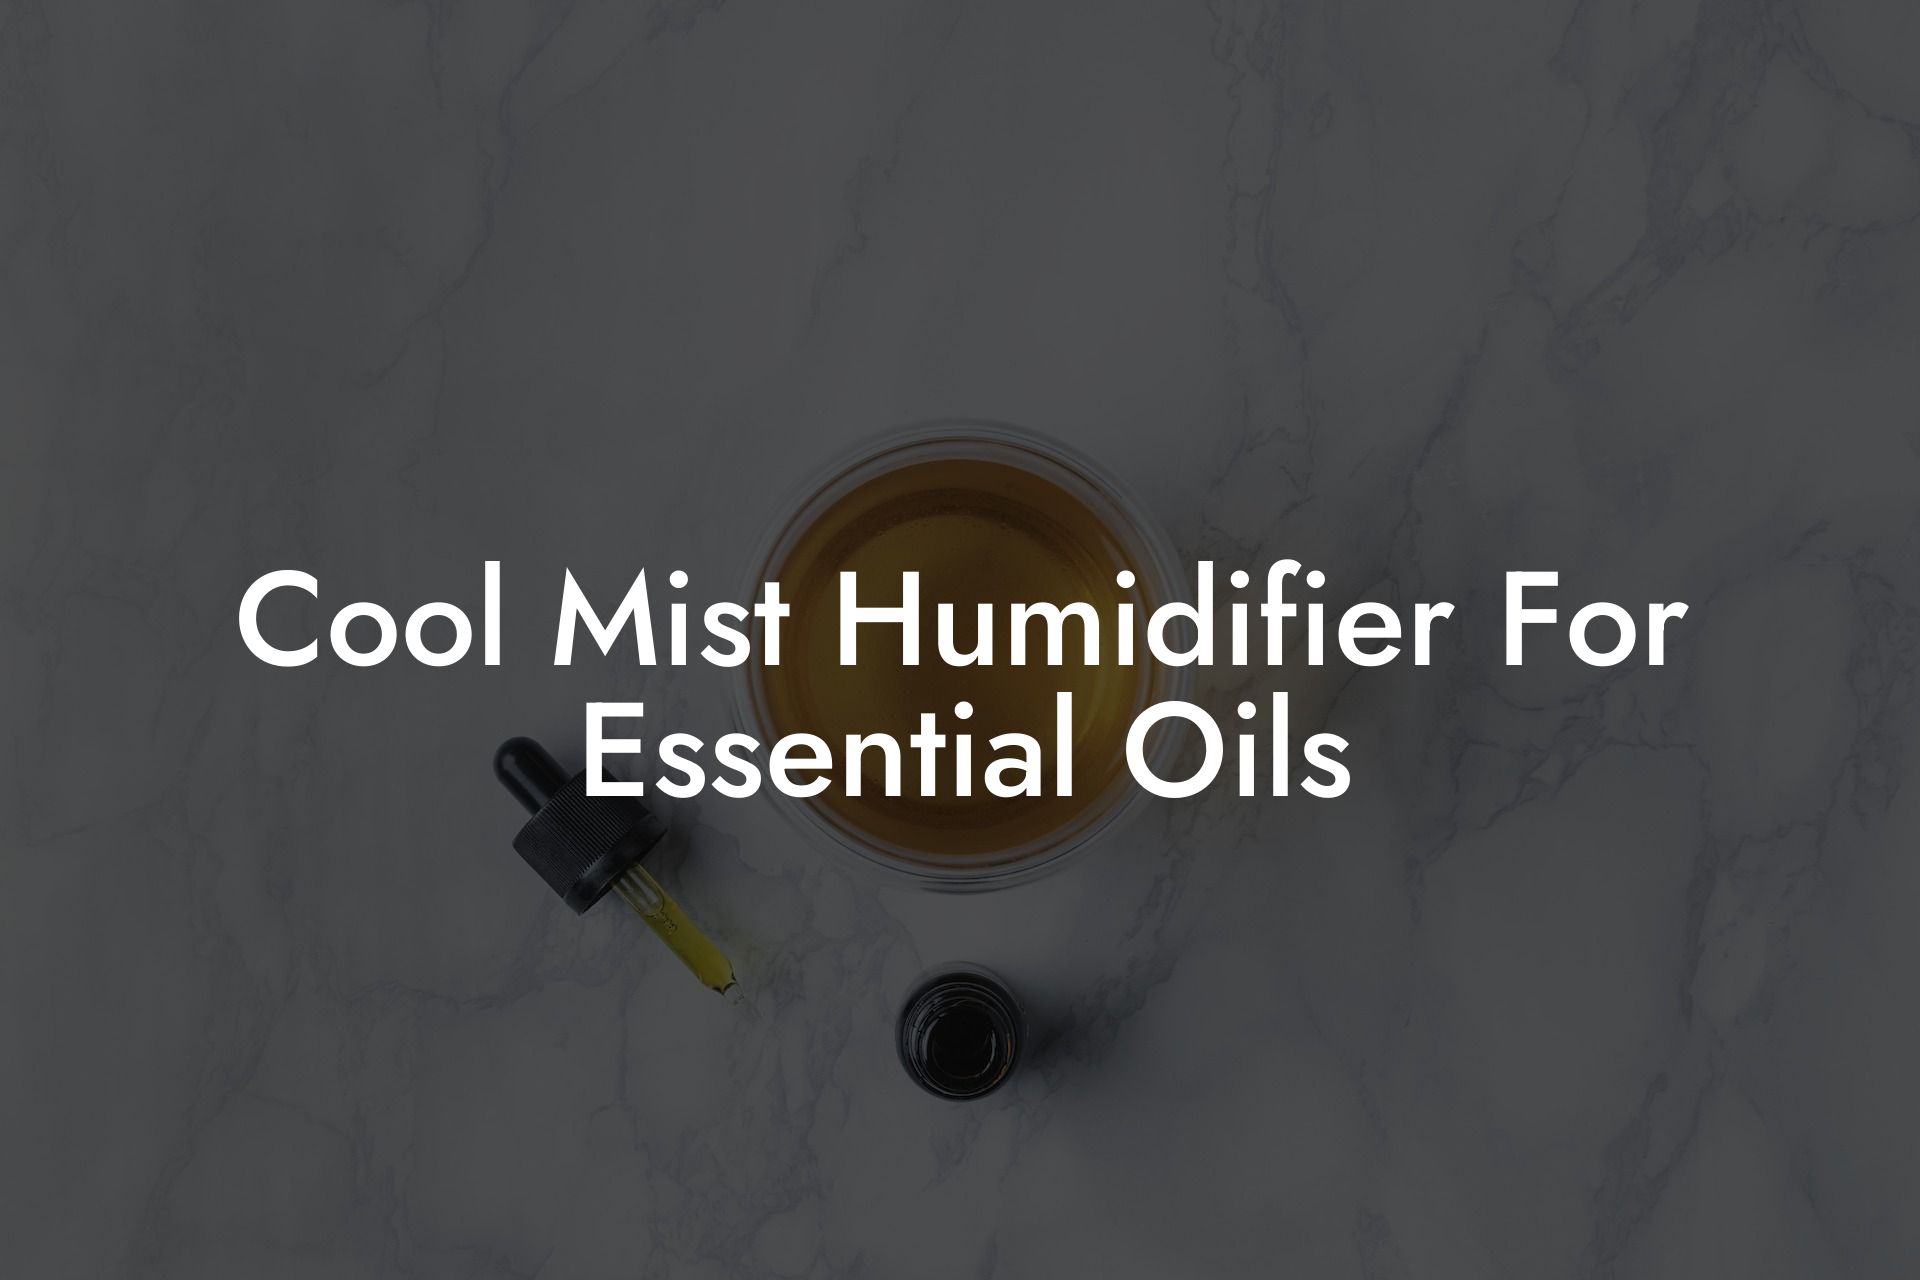 Cool Mist Humidifier For Essential Oils